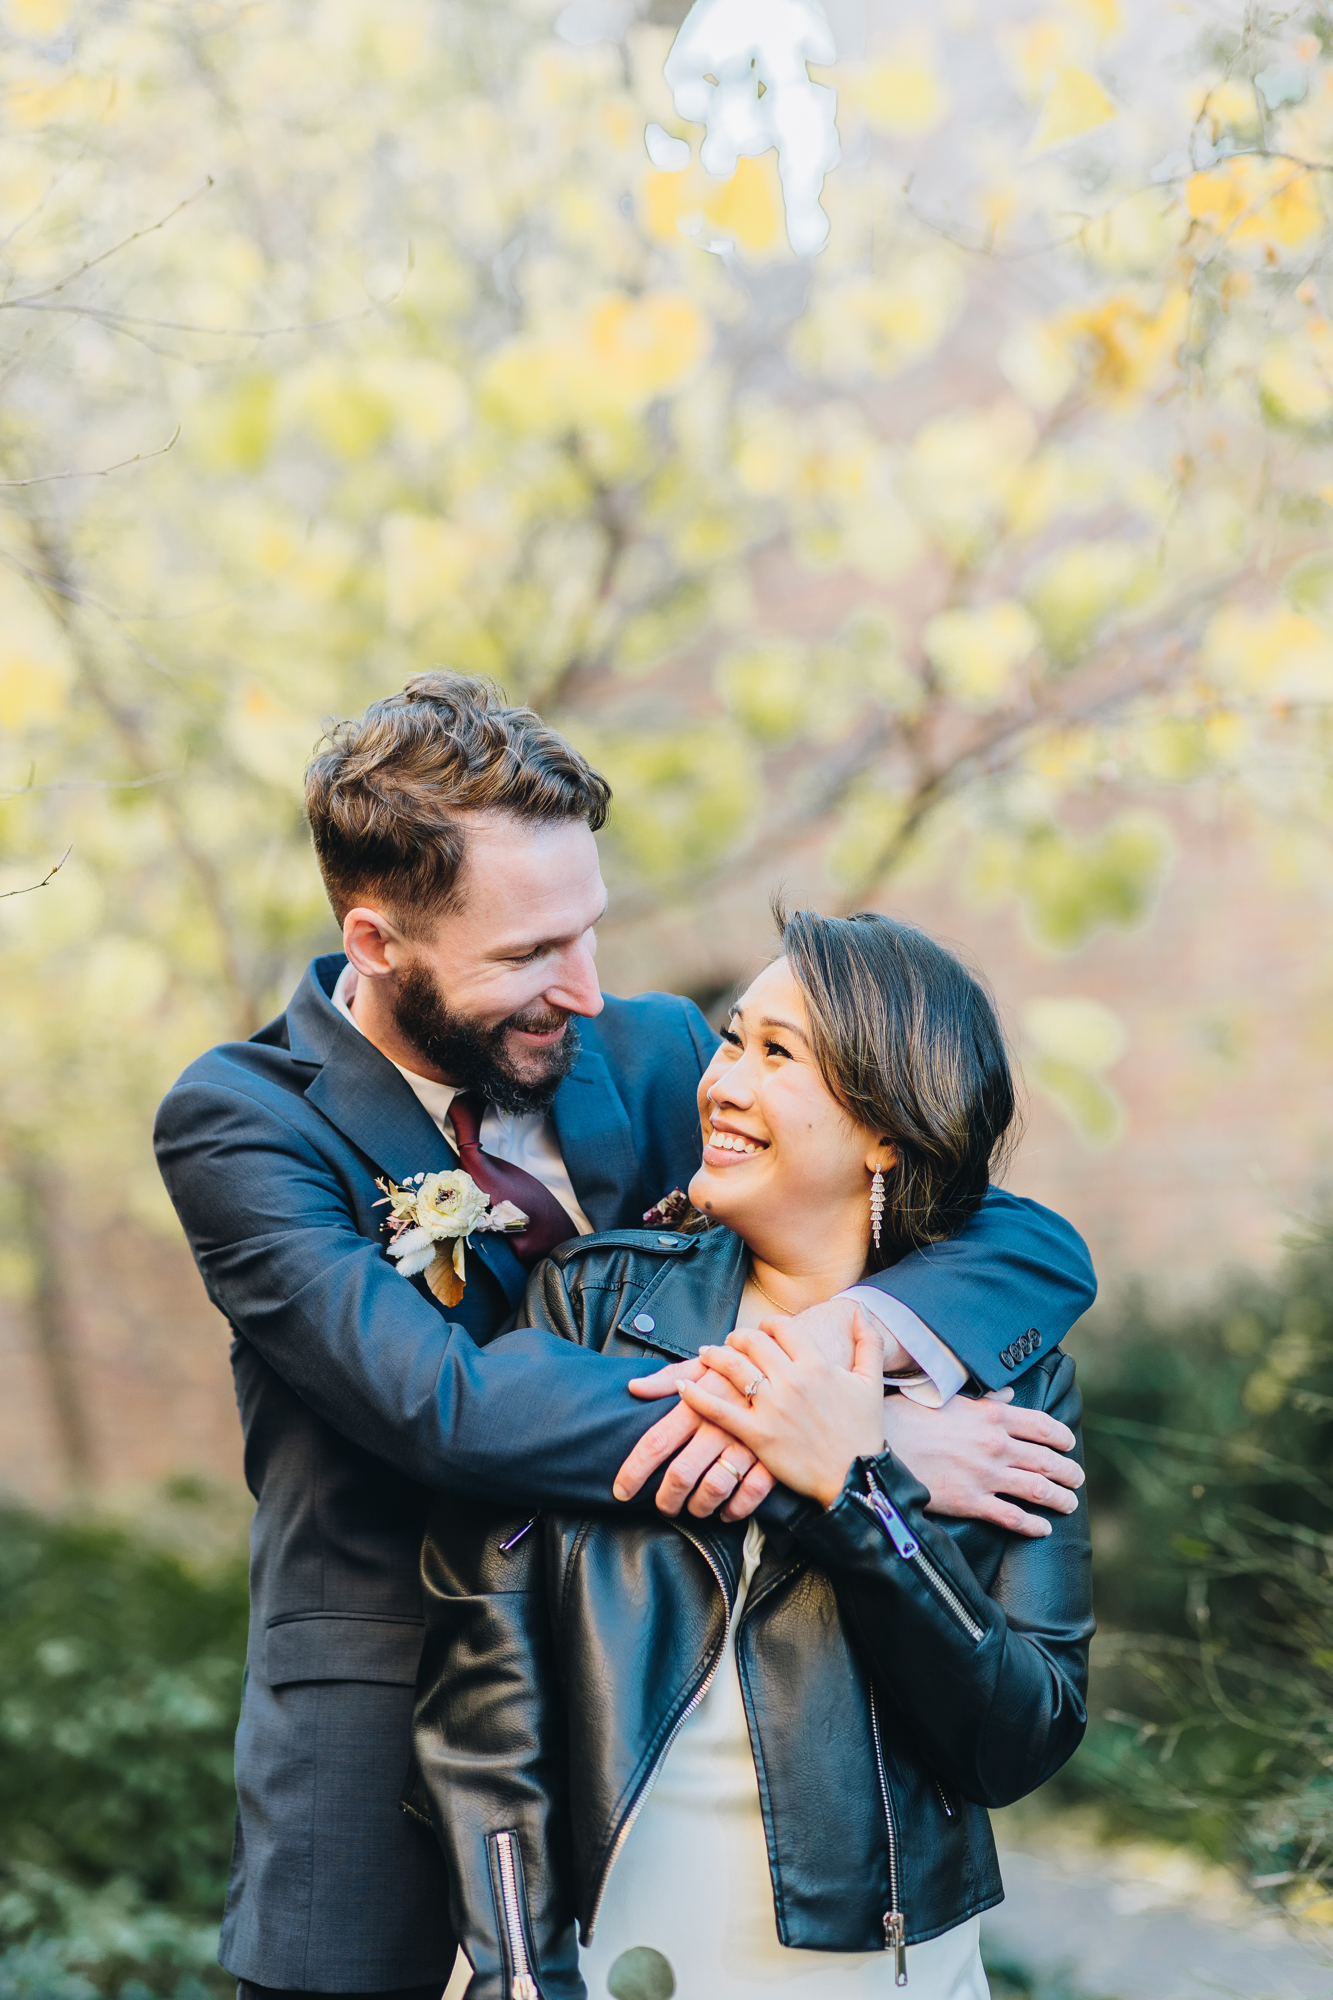 Intimate Fall DUMBO Elopement with NYC views and foliage